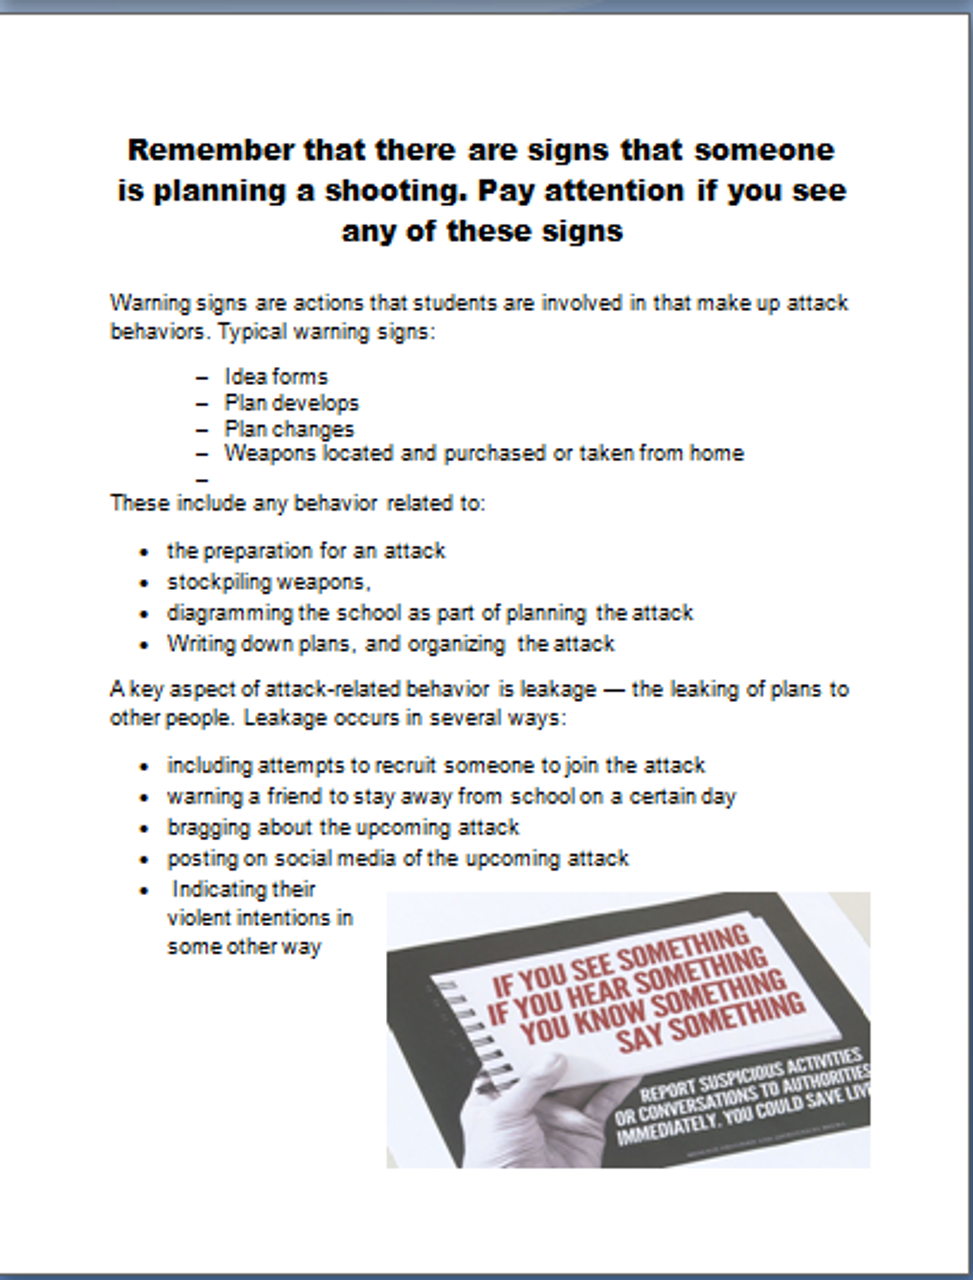 What to do if there is an "Active Shooter" on Campus